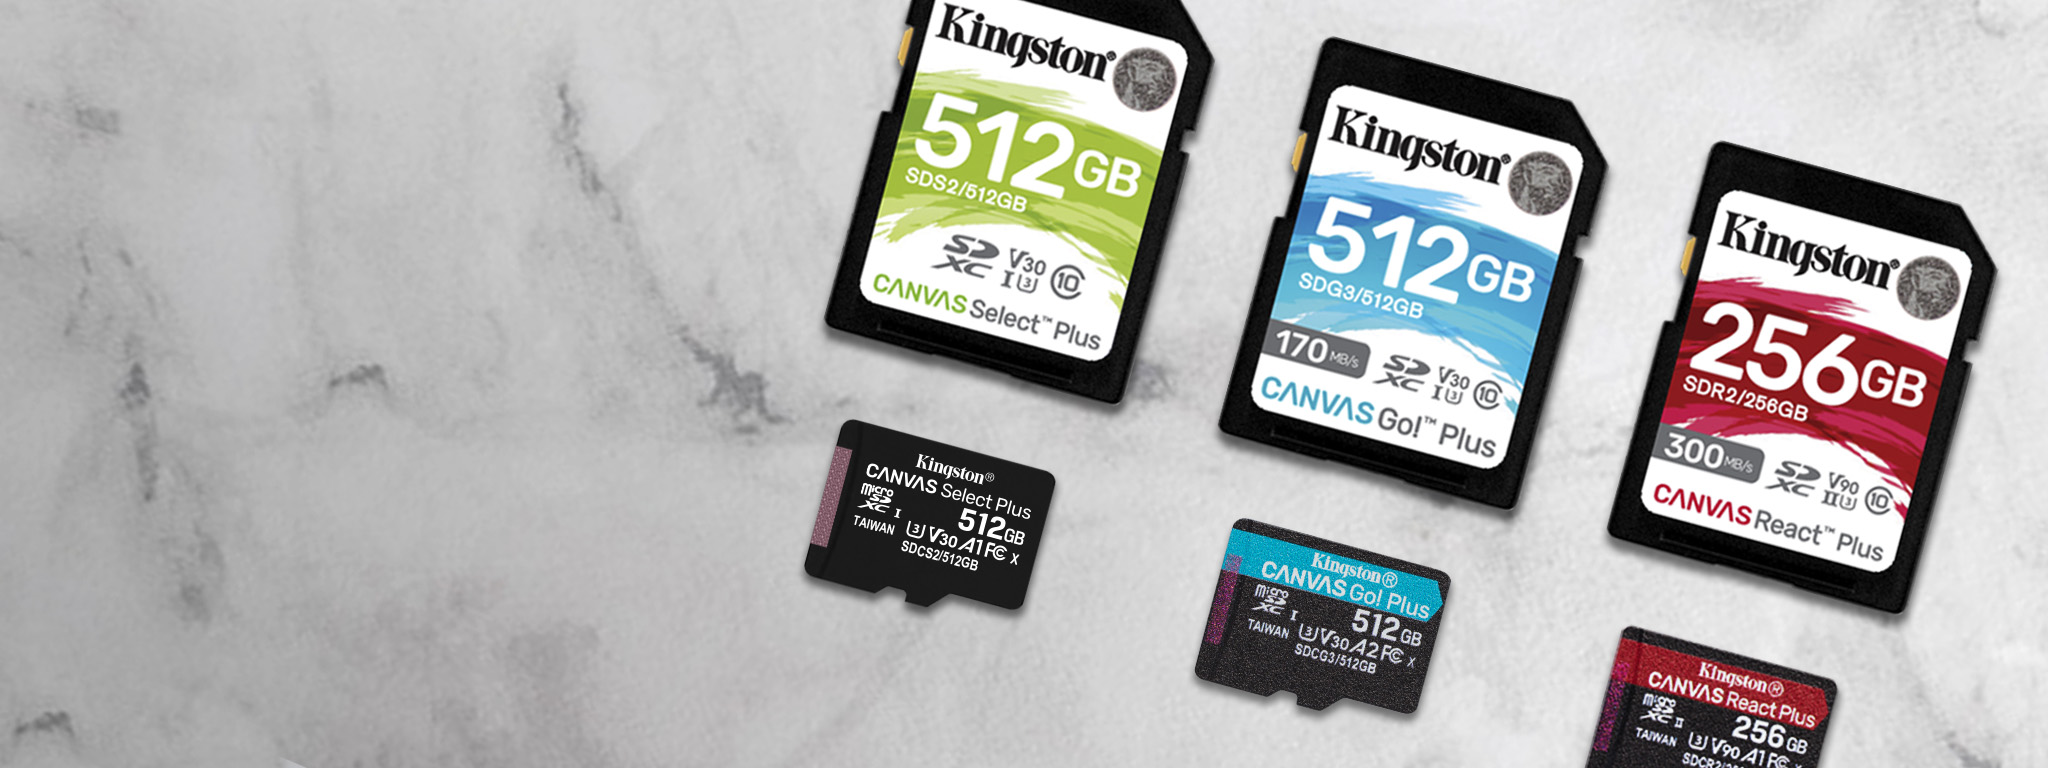 Attendant battery soul A Guide to Speed Classes for SD and microSD Cards - Kingston Technology